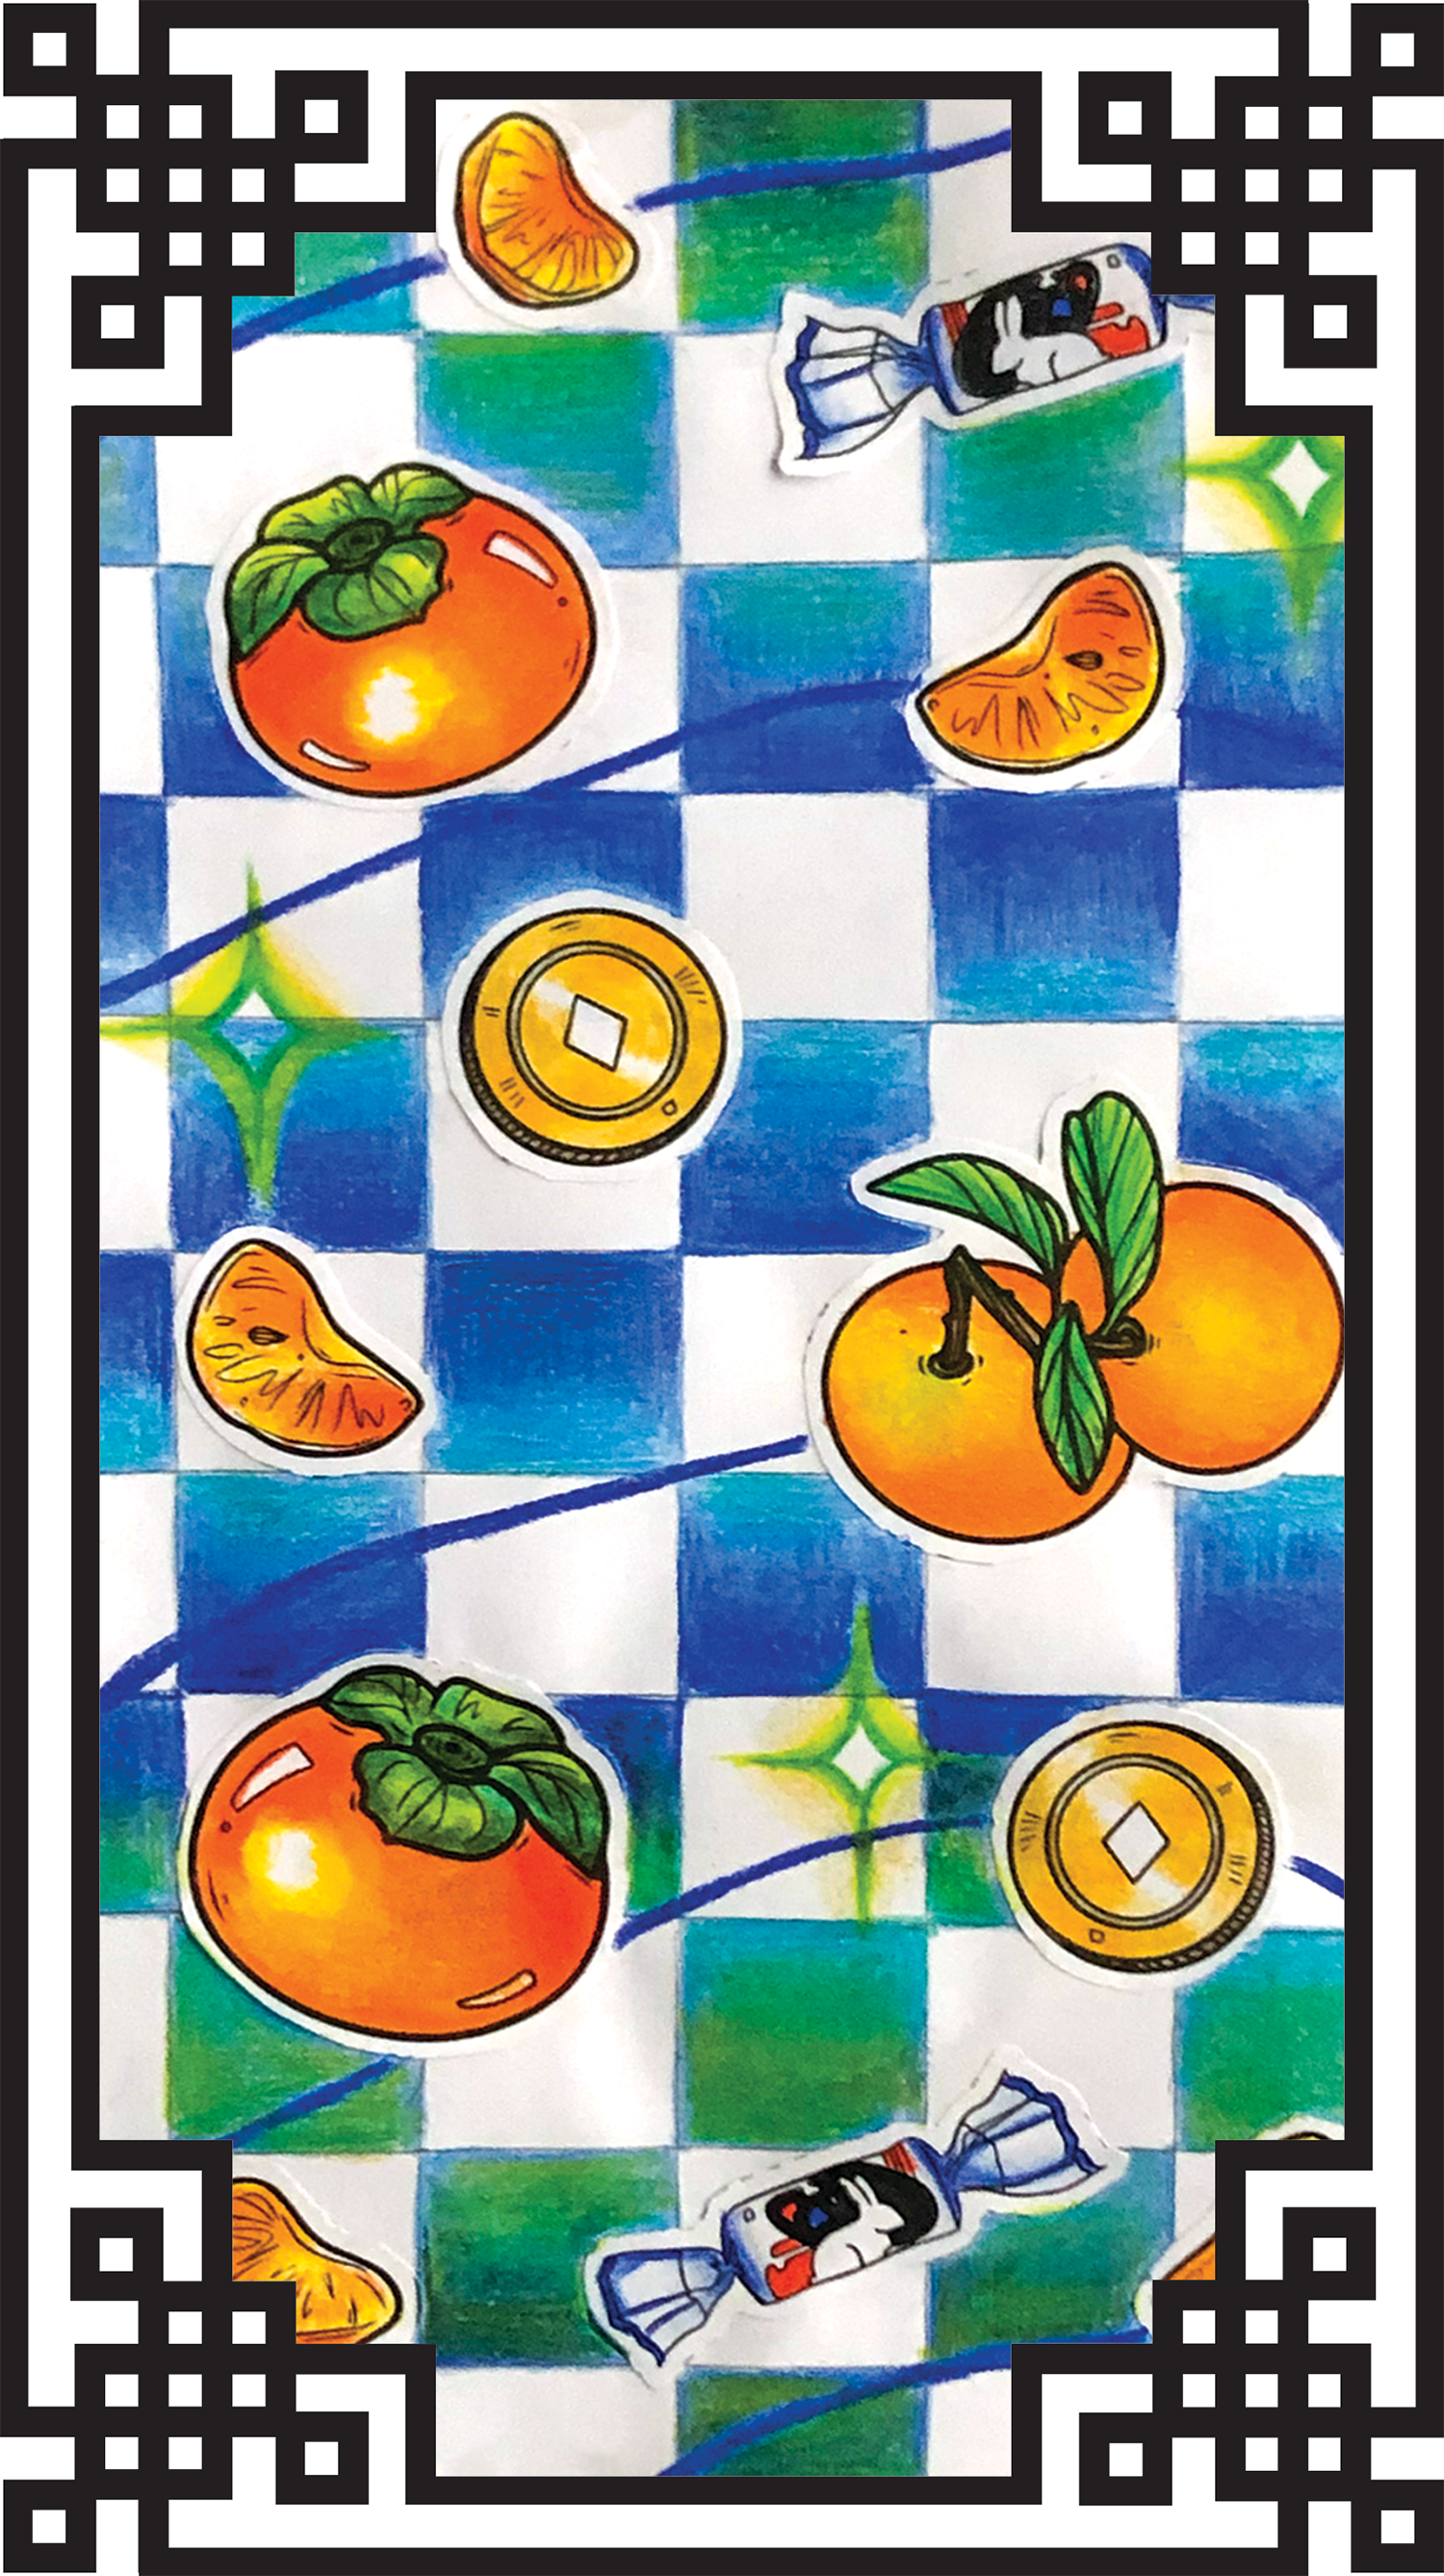 Vertical Yue Moon artwork of orange persimmons and mandarin oranges on a blue and white checkered background with a traditional Chinese black & white border around it.